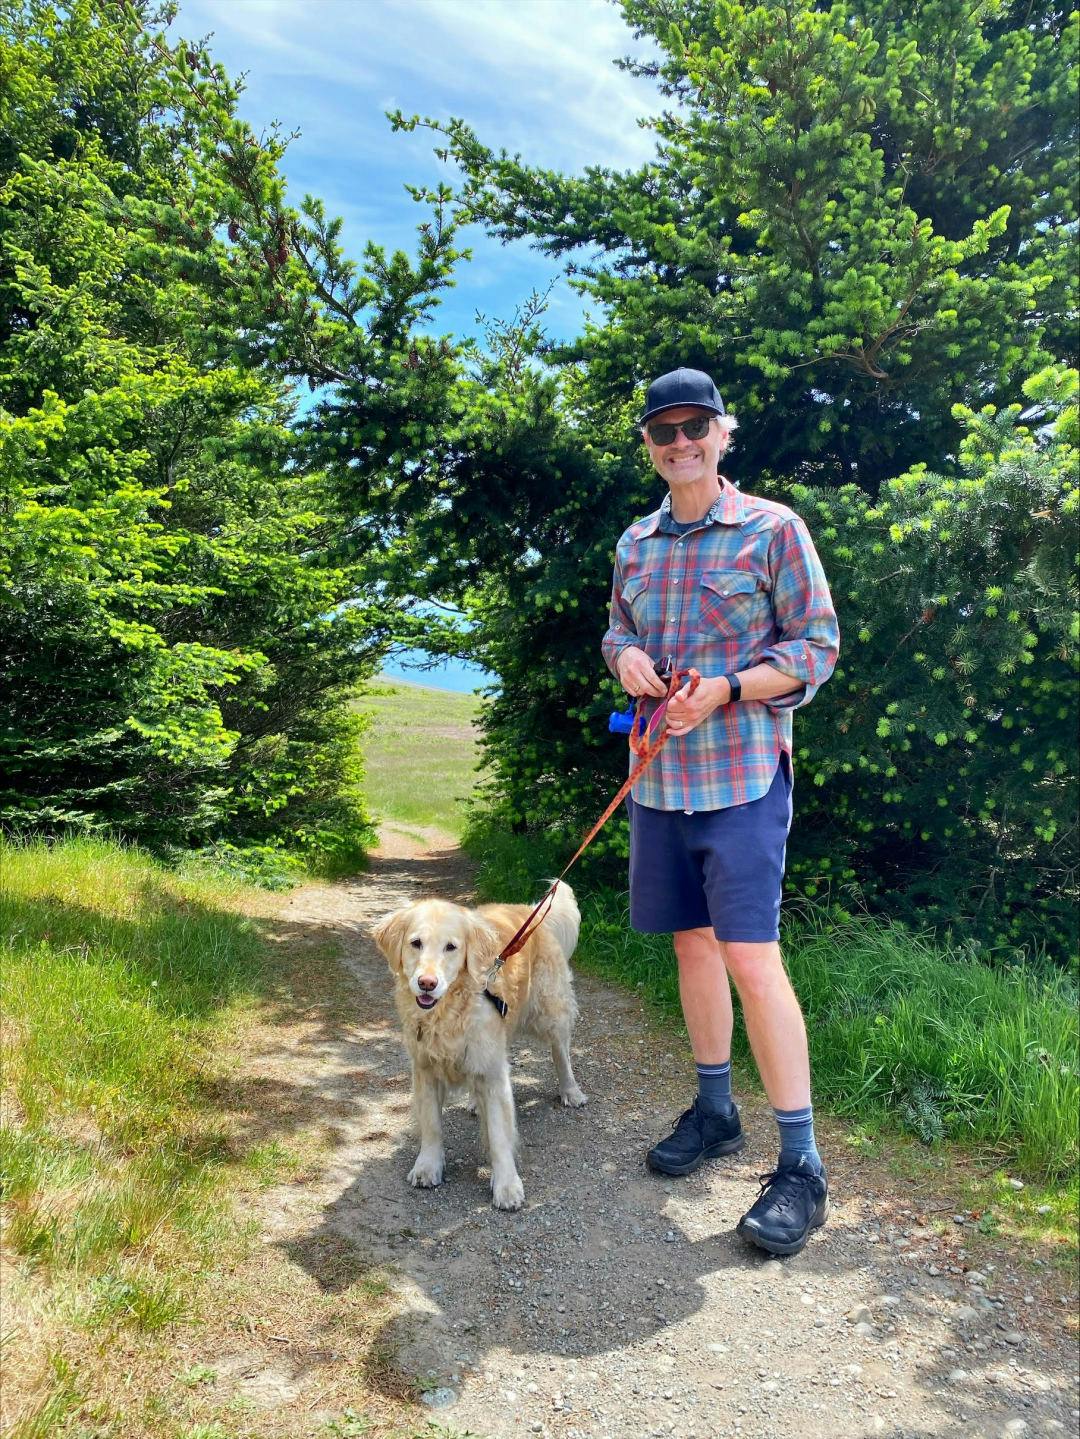 Brian Knollenberg on a hike with his golden retriever